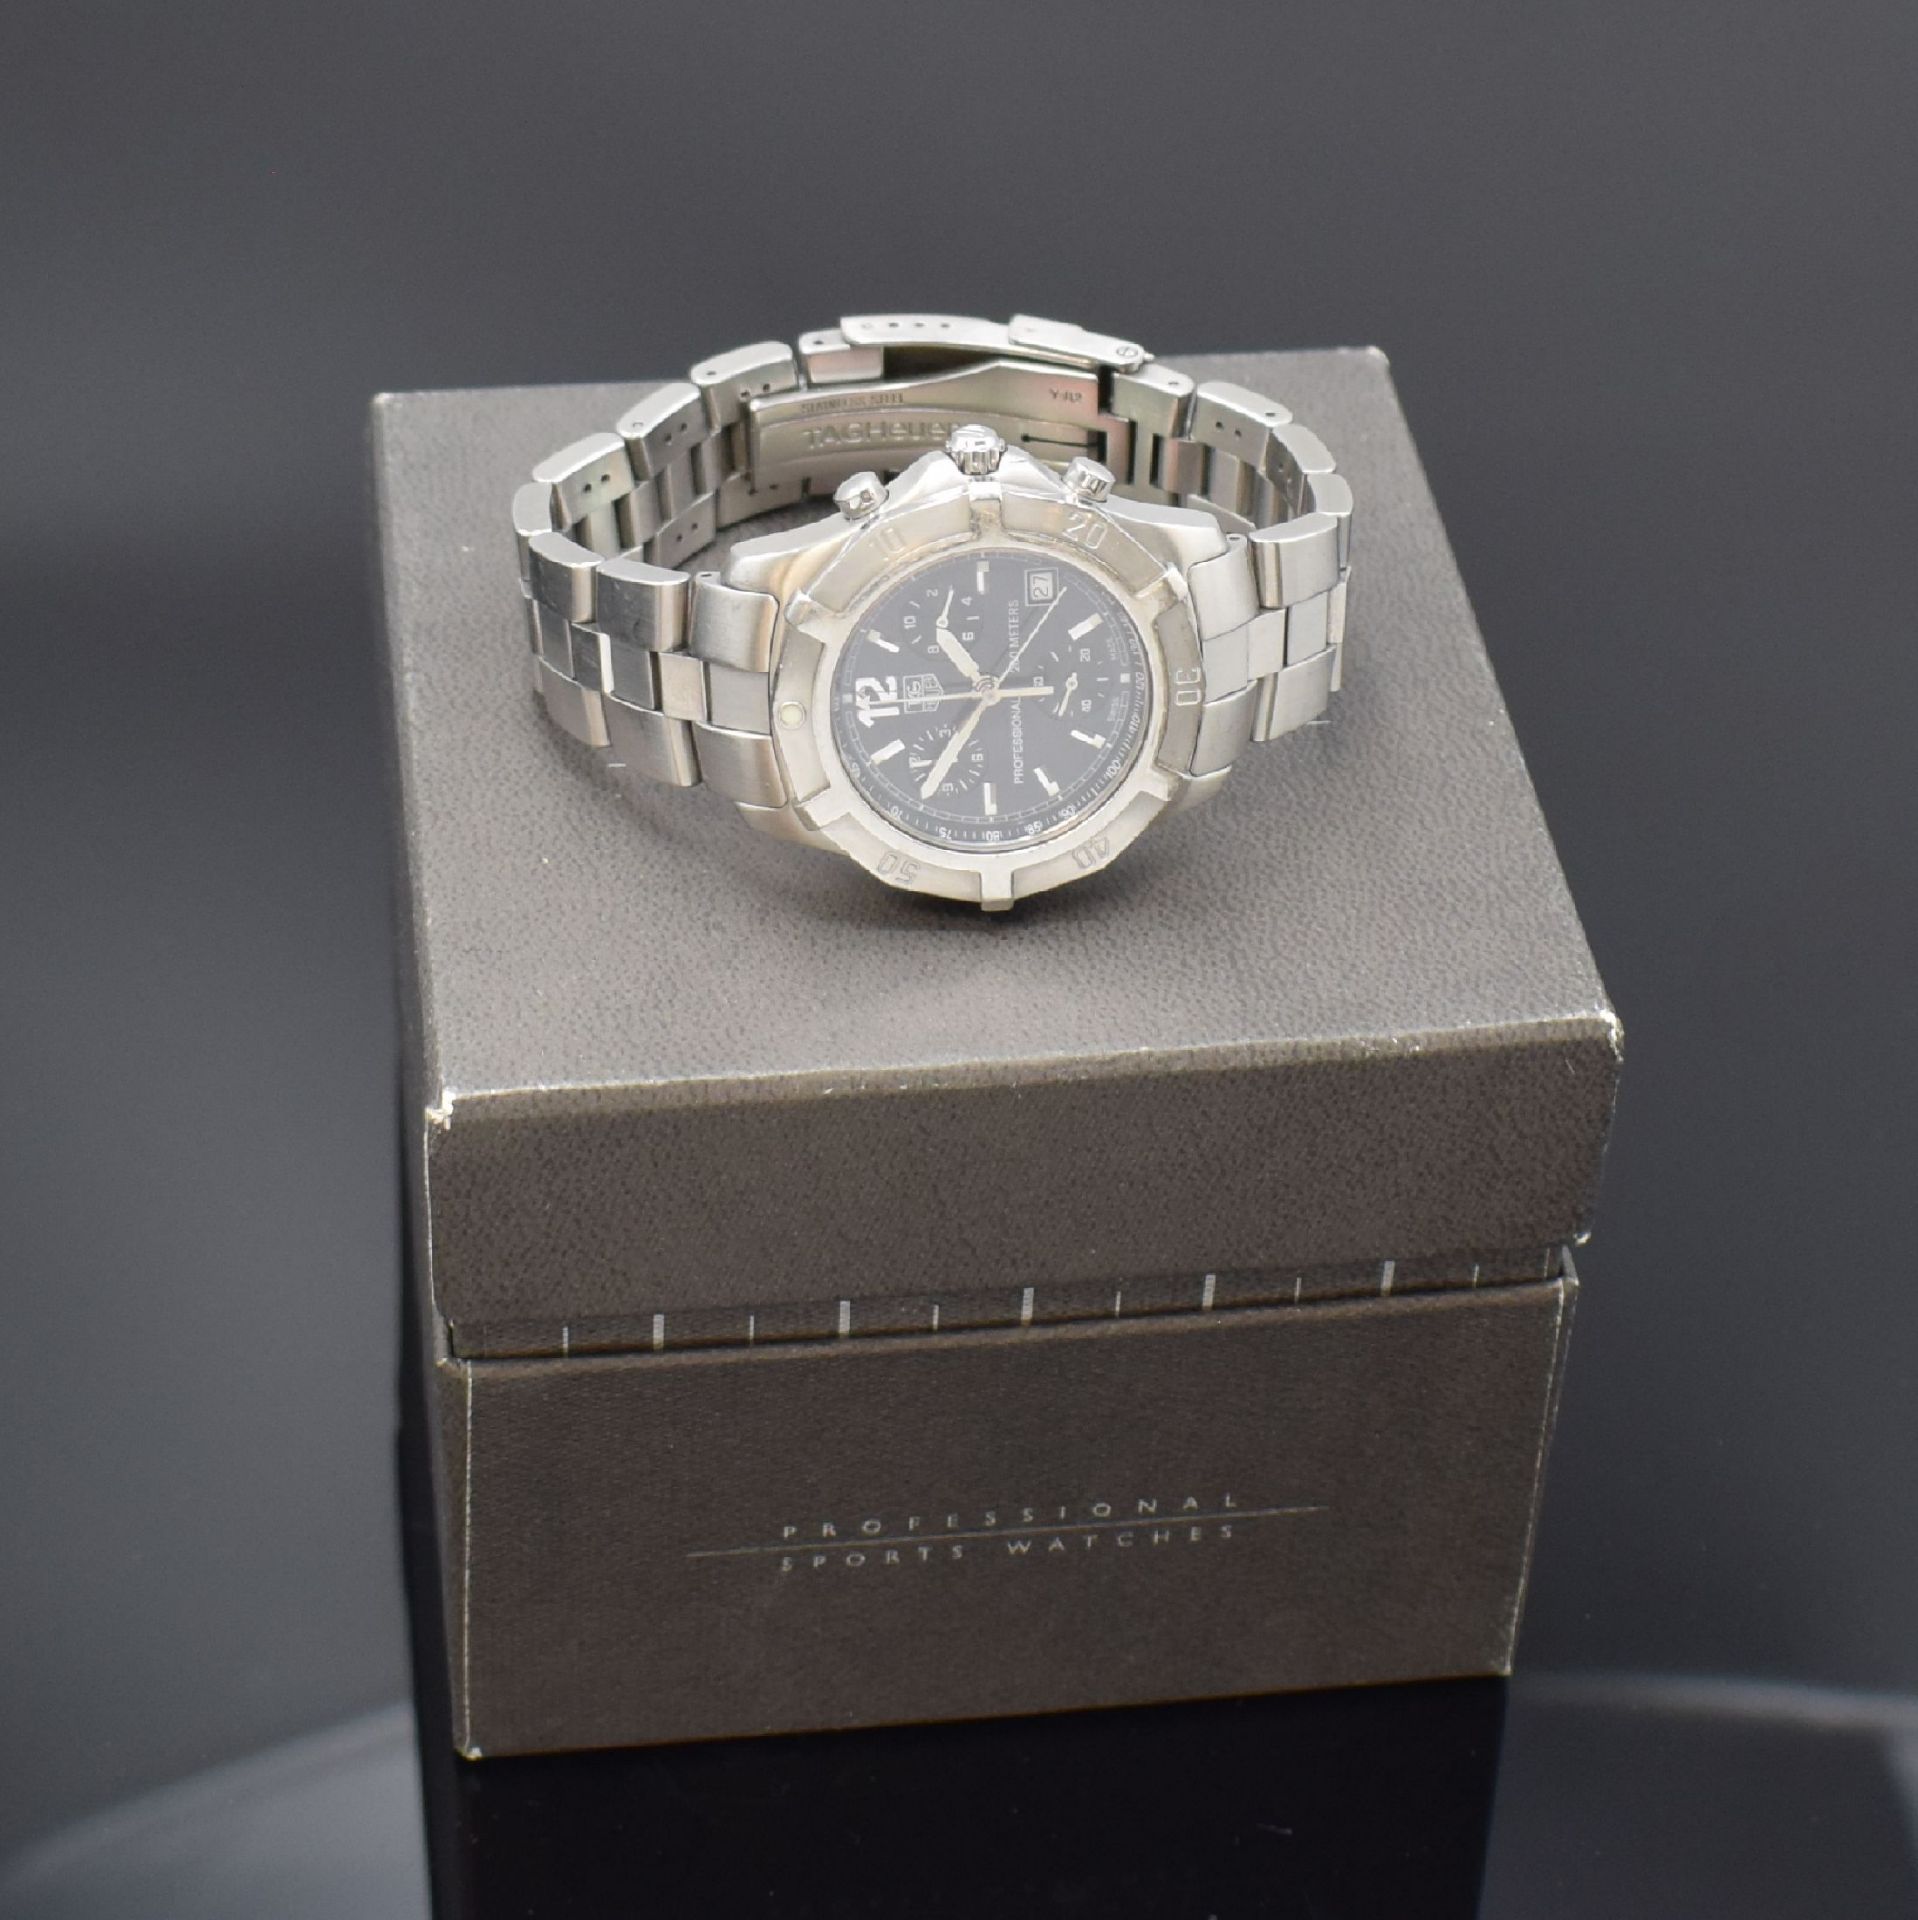 TAG HEUER Professional 2000 Herrenchronograph in Stahl - Image 6 of 6